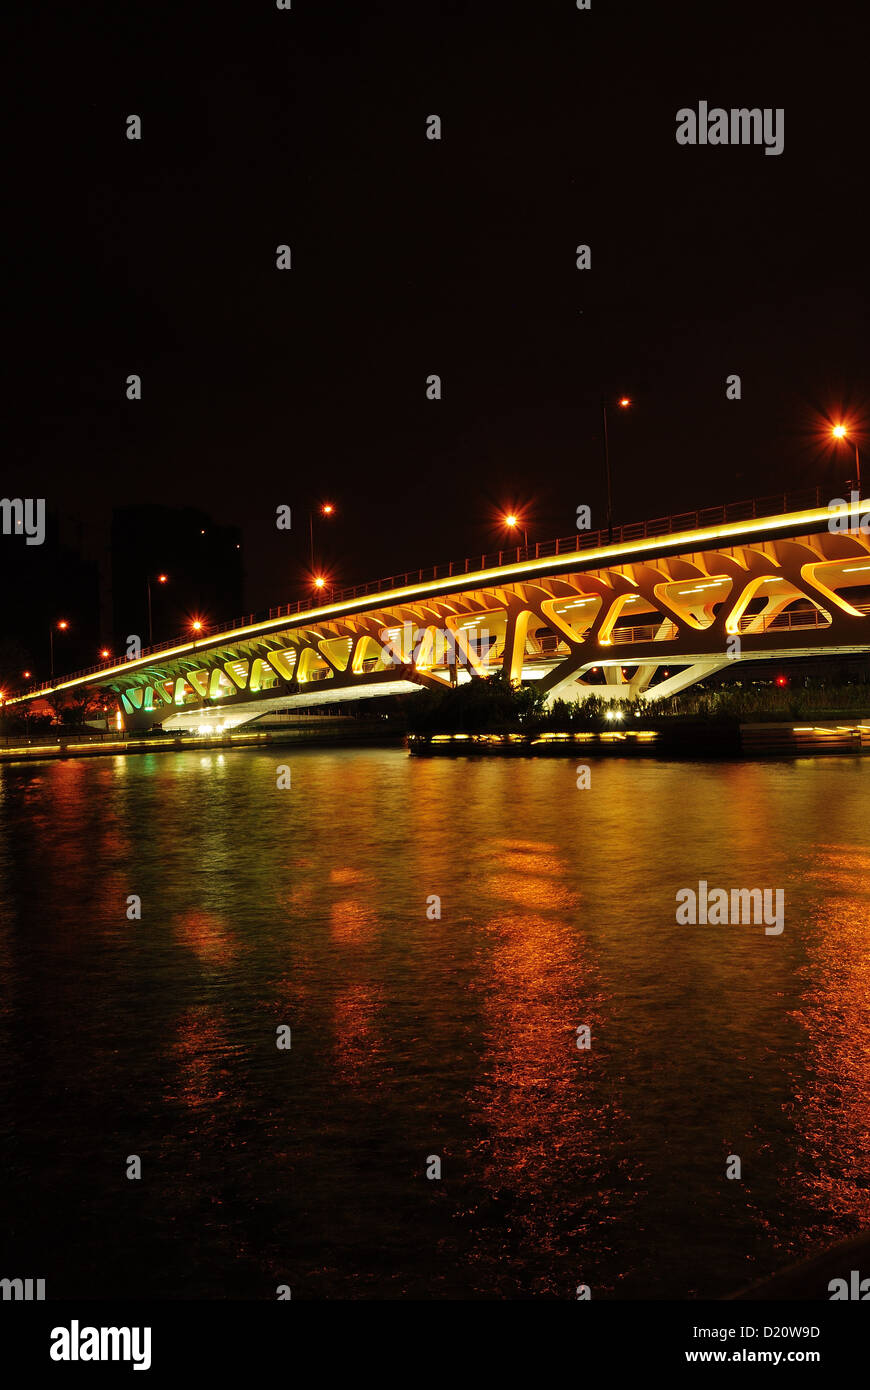 Night photography of riverside vehicle bridge with beautiful lighting reflected upon the river water. Stock Photo